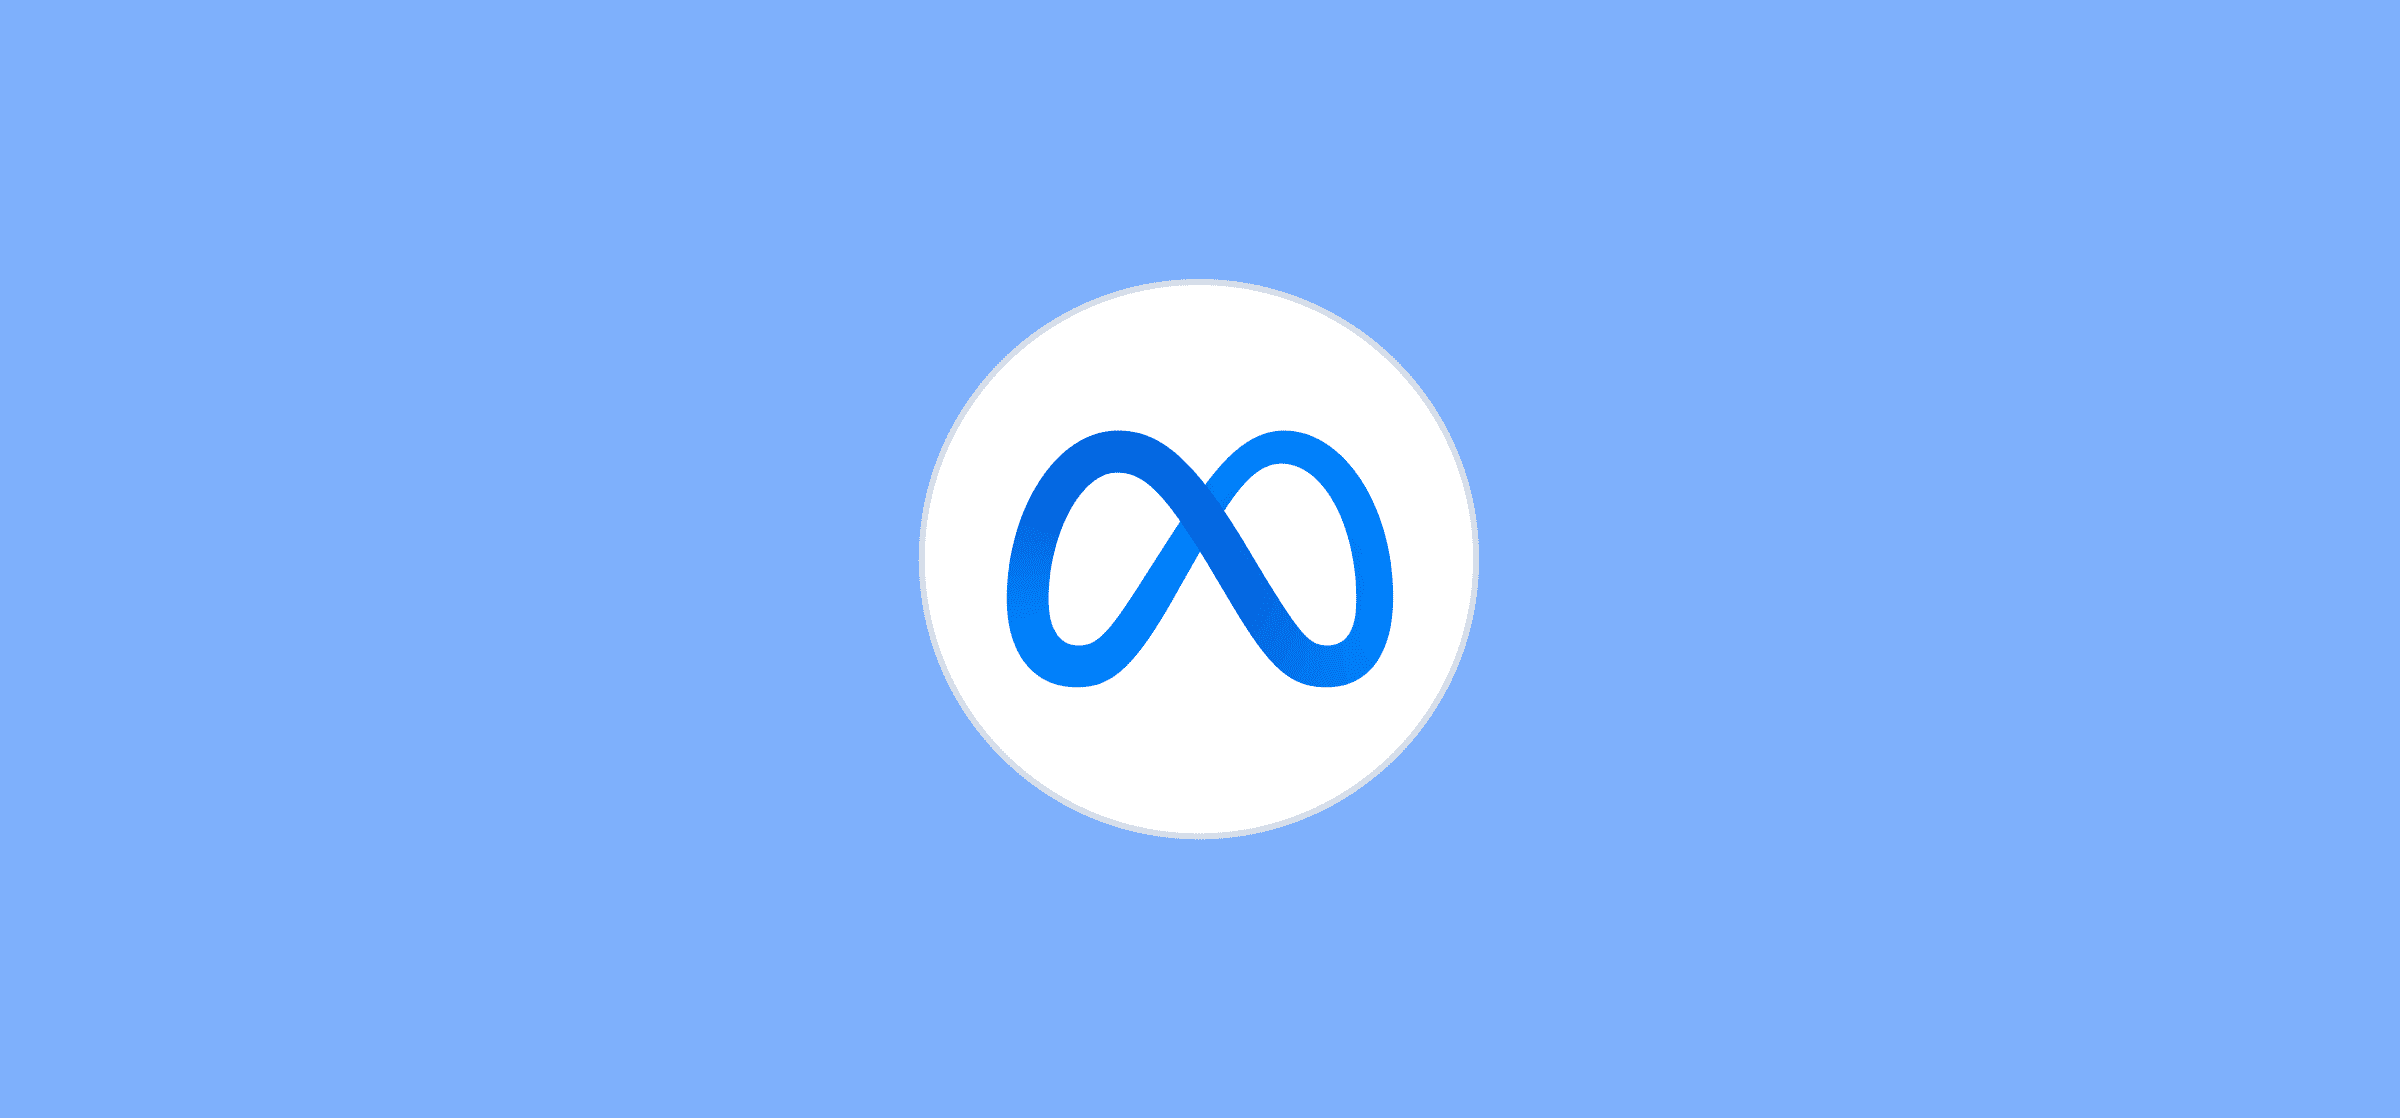 A logo for Meta on a blue background.